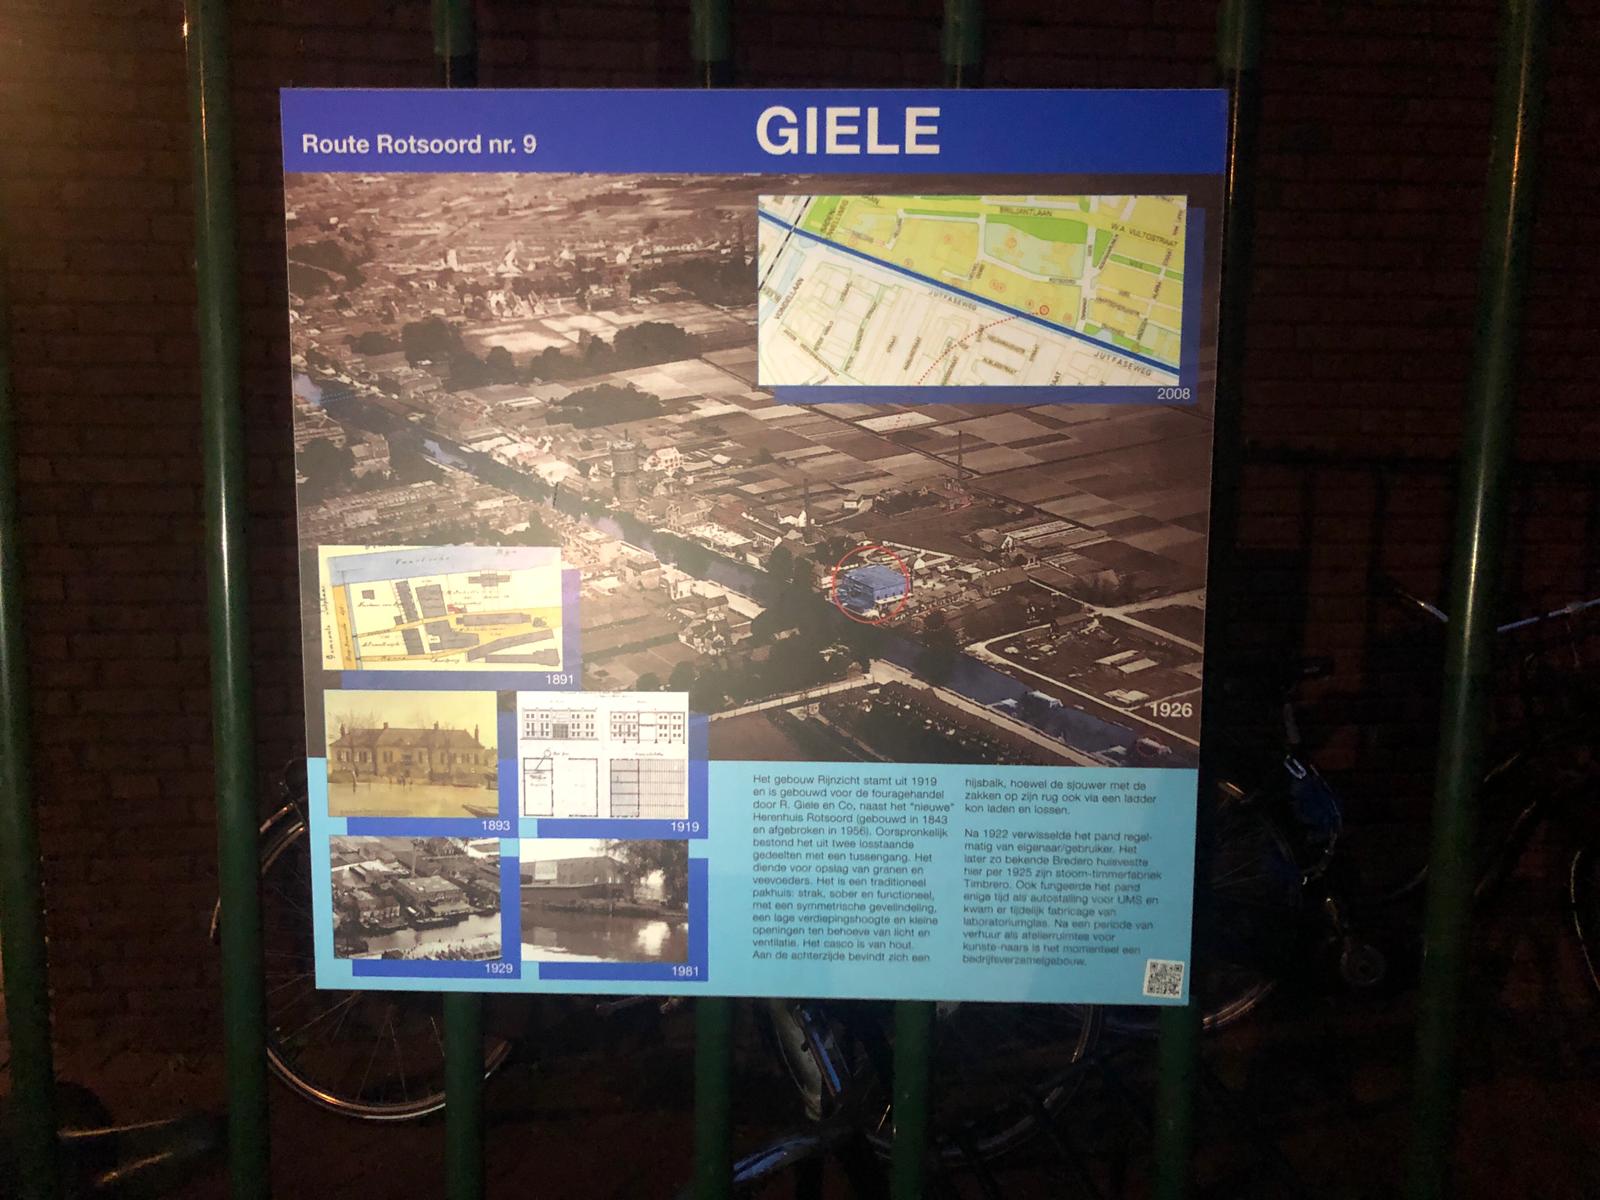 Route Rotsoord no. 9 – Giele